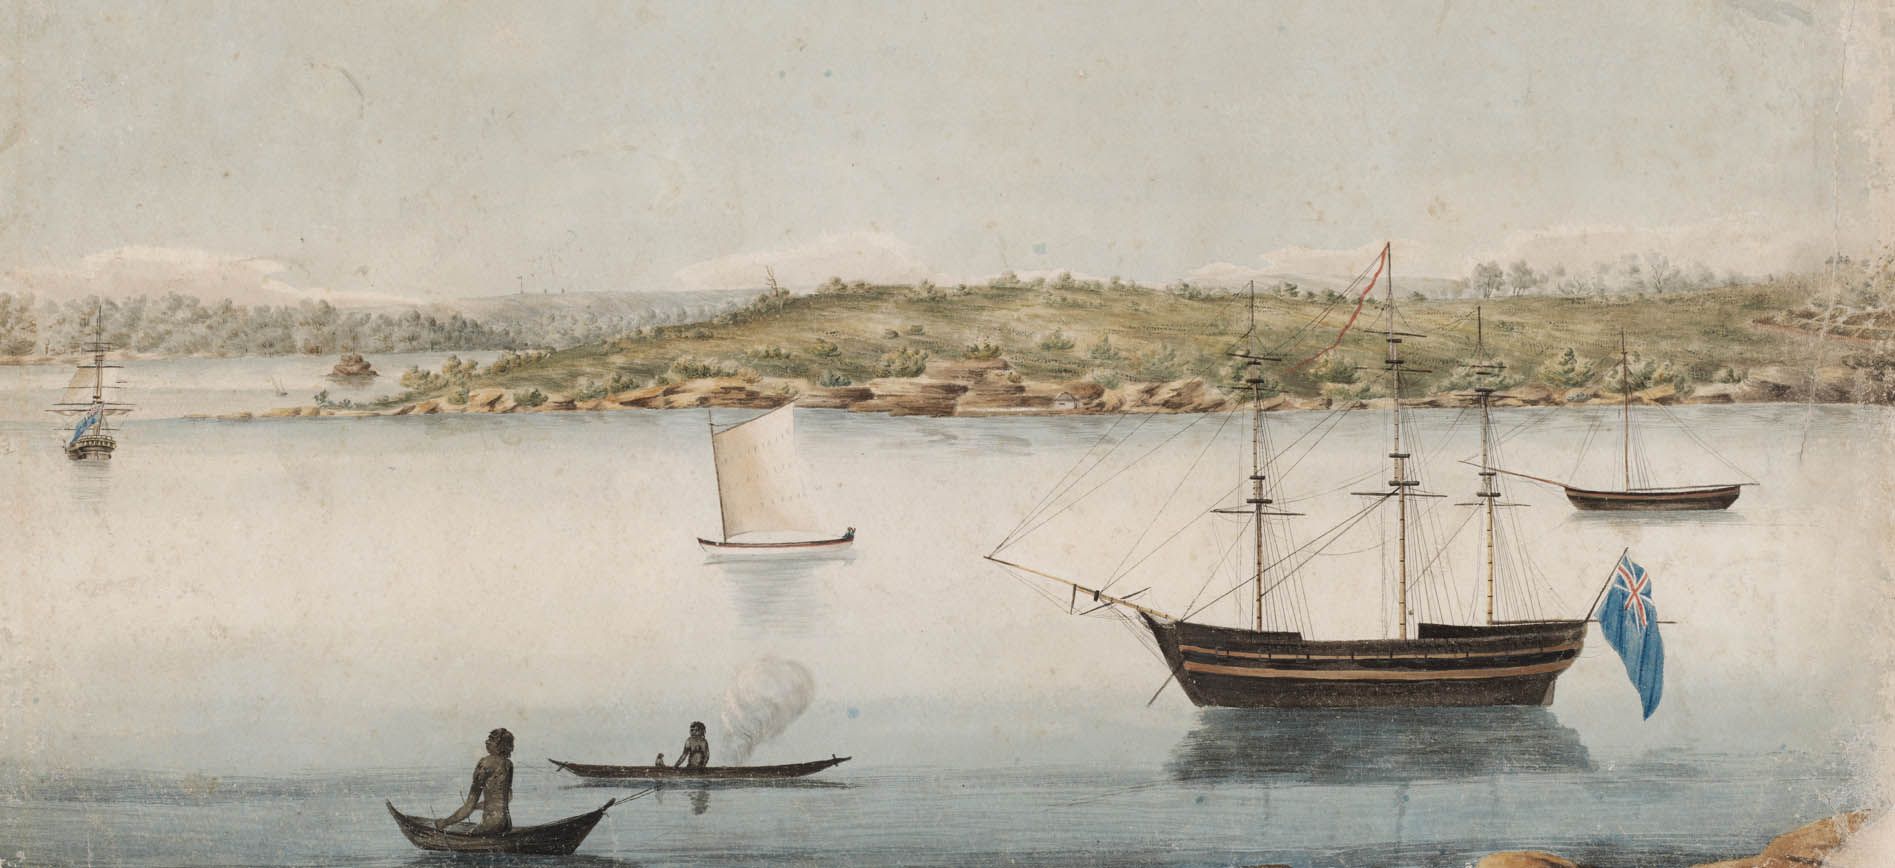 Paiting showing boats and Aboriginal people in canoes